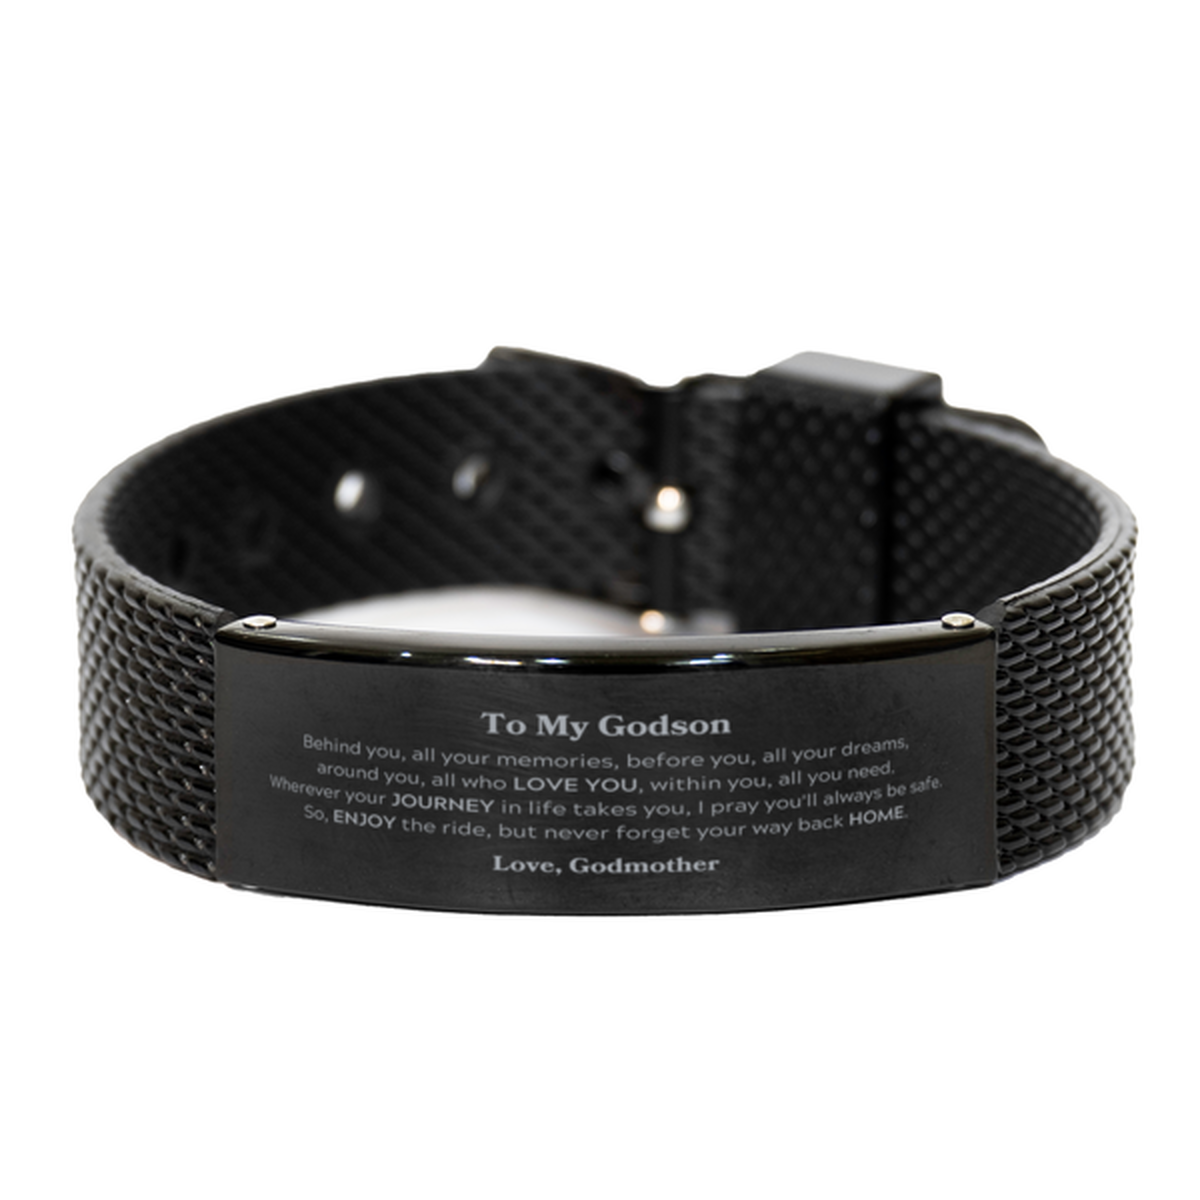 To My Godson Graduation Gifts from Godmother, Godson Black Shark Mesh Bracelet Christmas Birthday Gifts for Godson Behind you, all your memories, before you, all your dreams. Love, Godmother